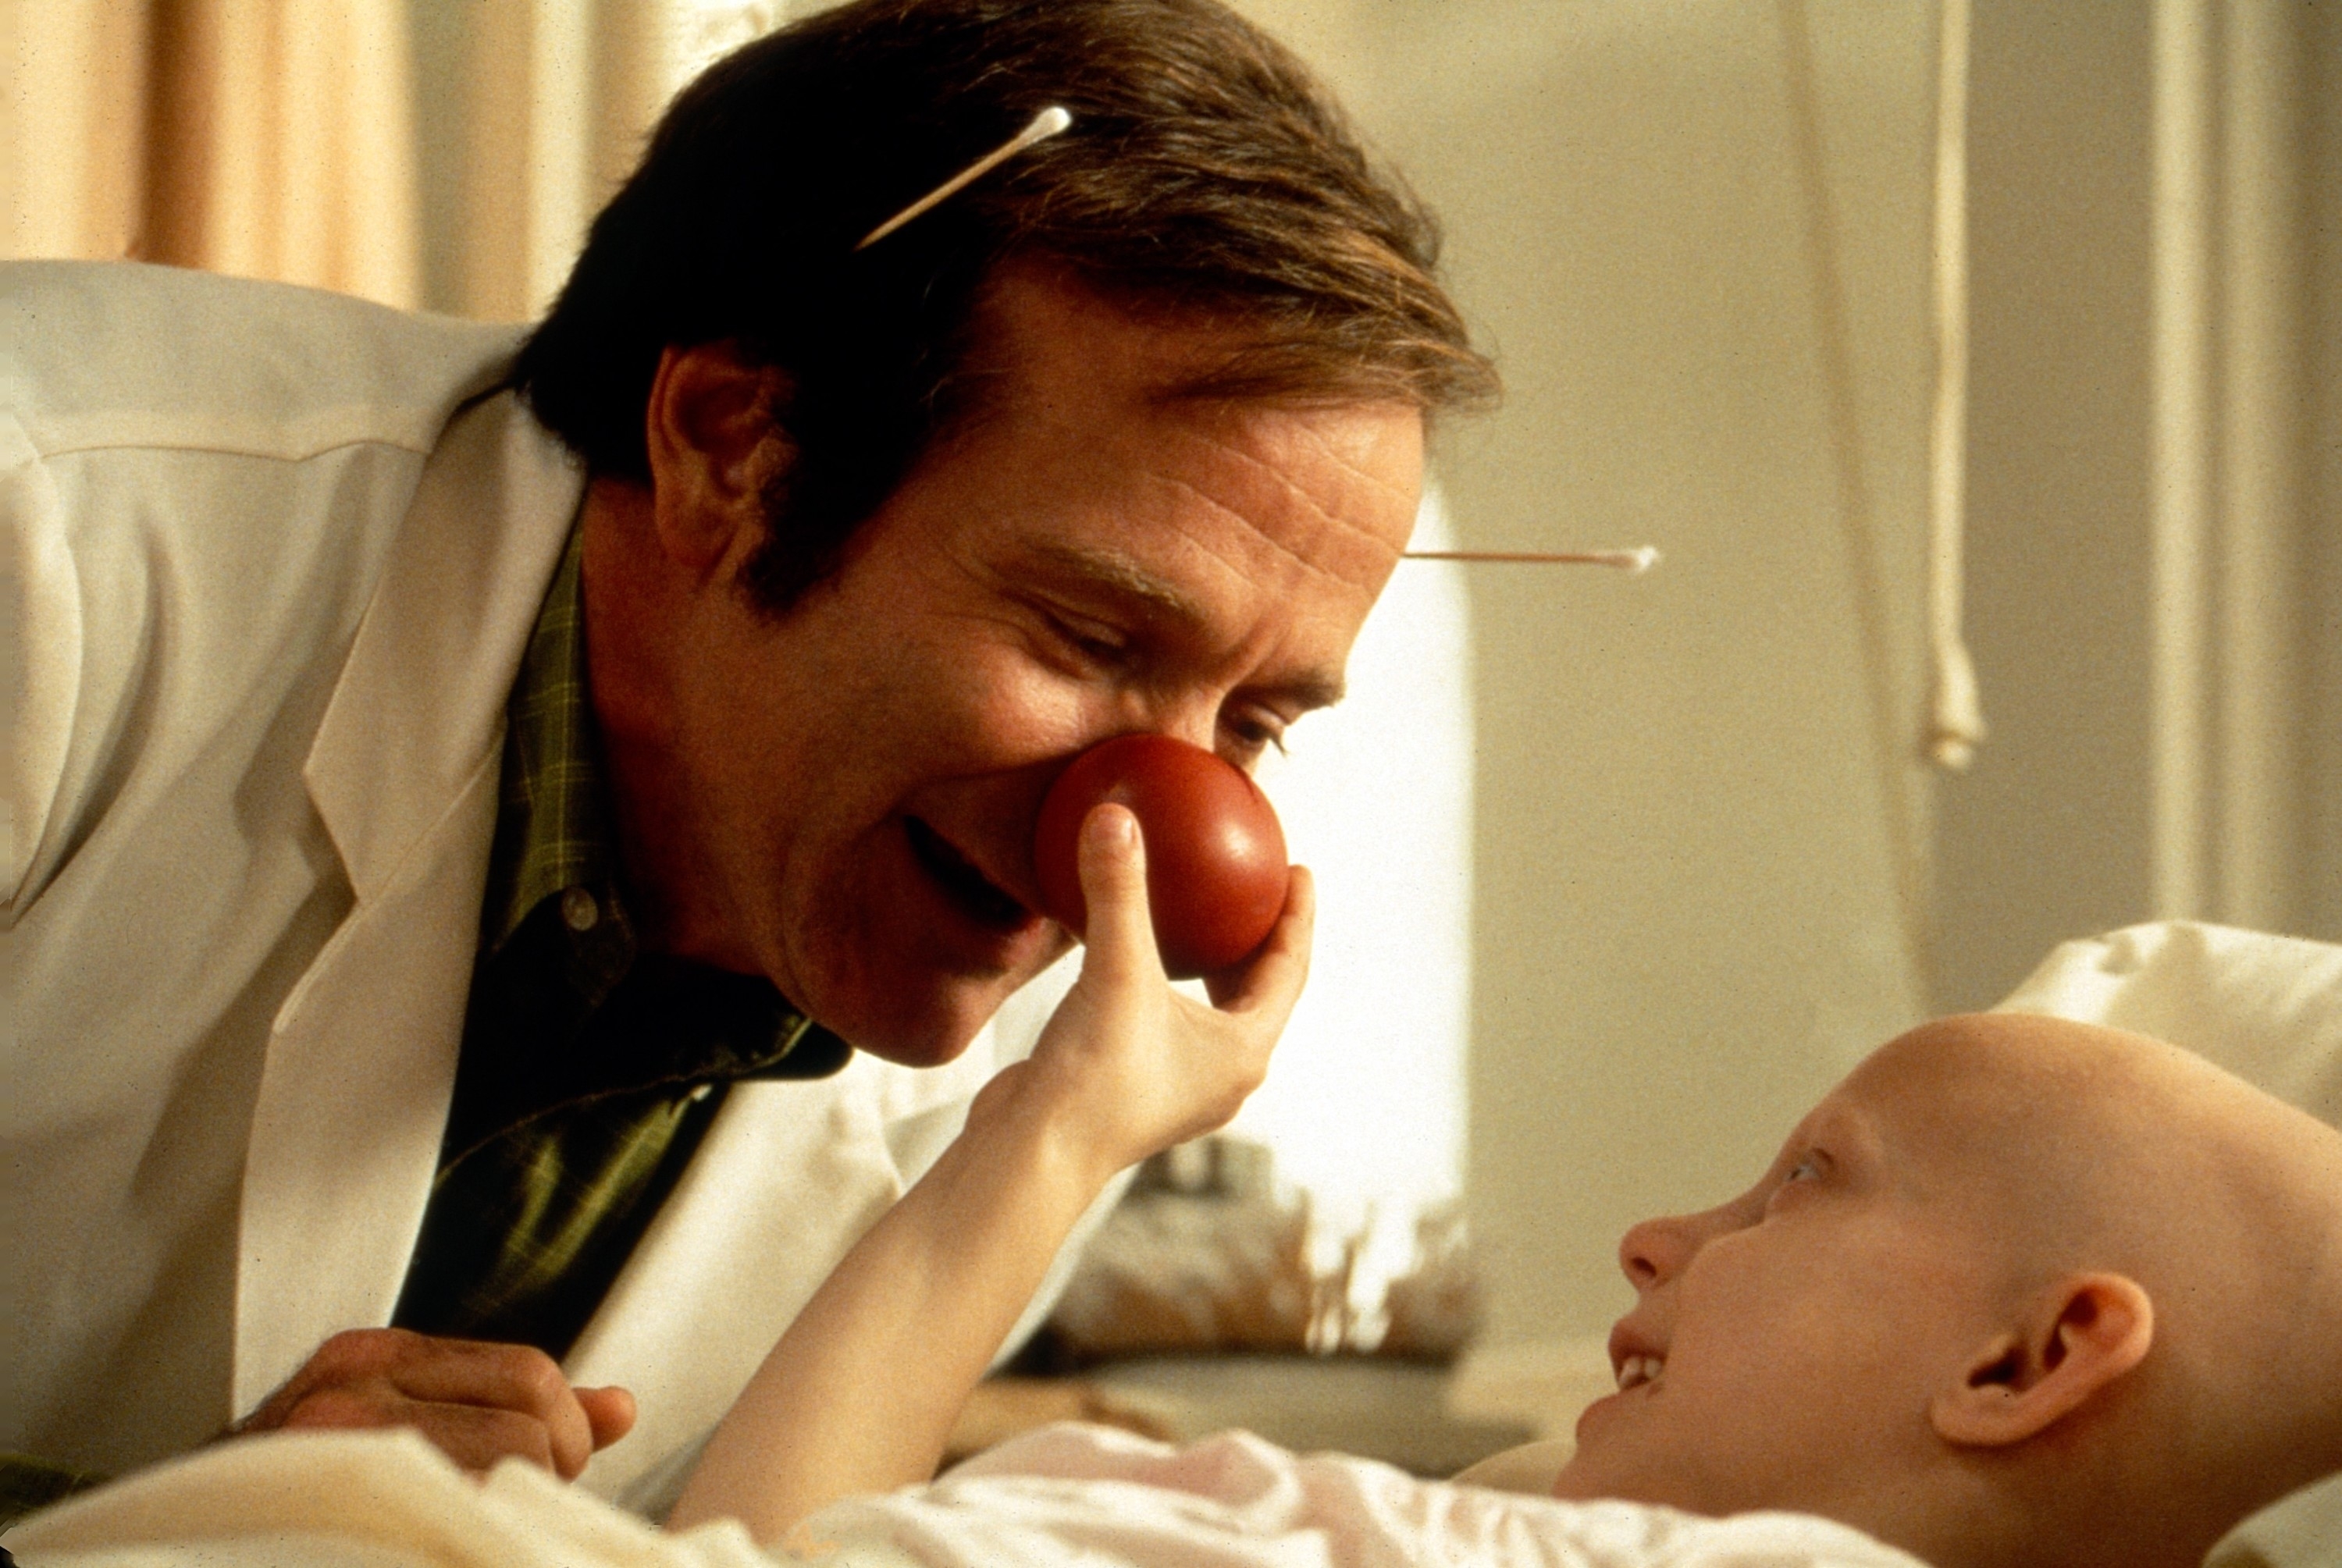 Robin Williams as Patch Adams using a red clown nose to cheer up a child patient in a hospital setting